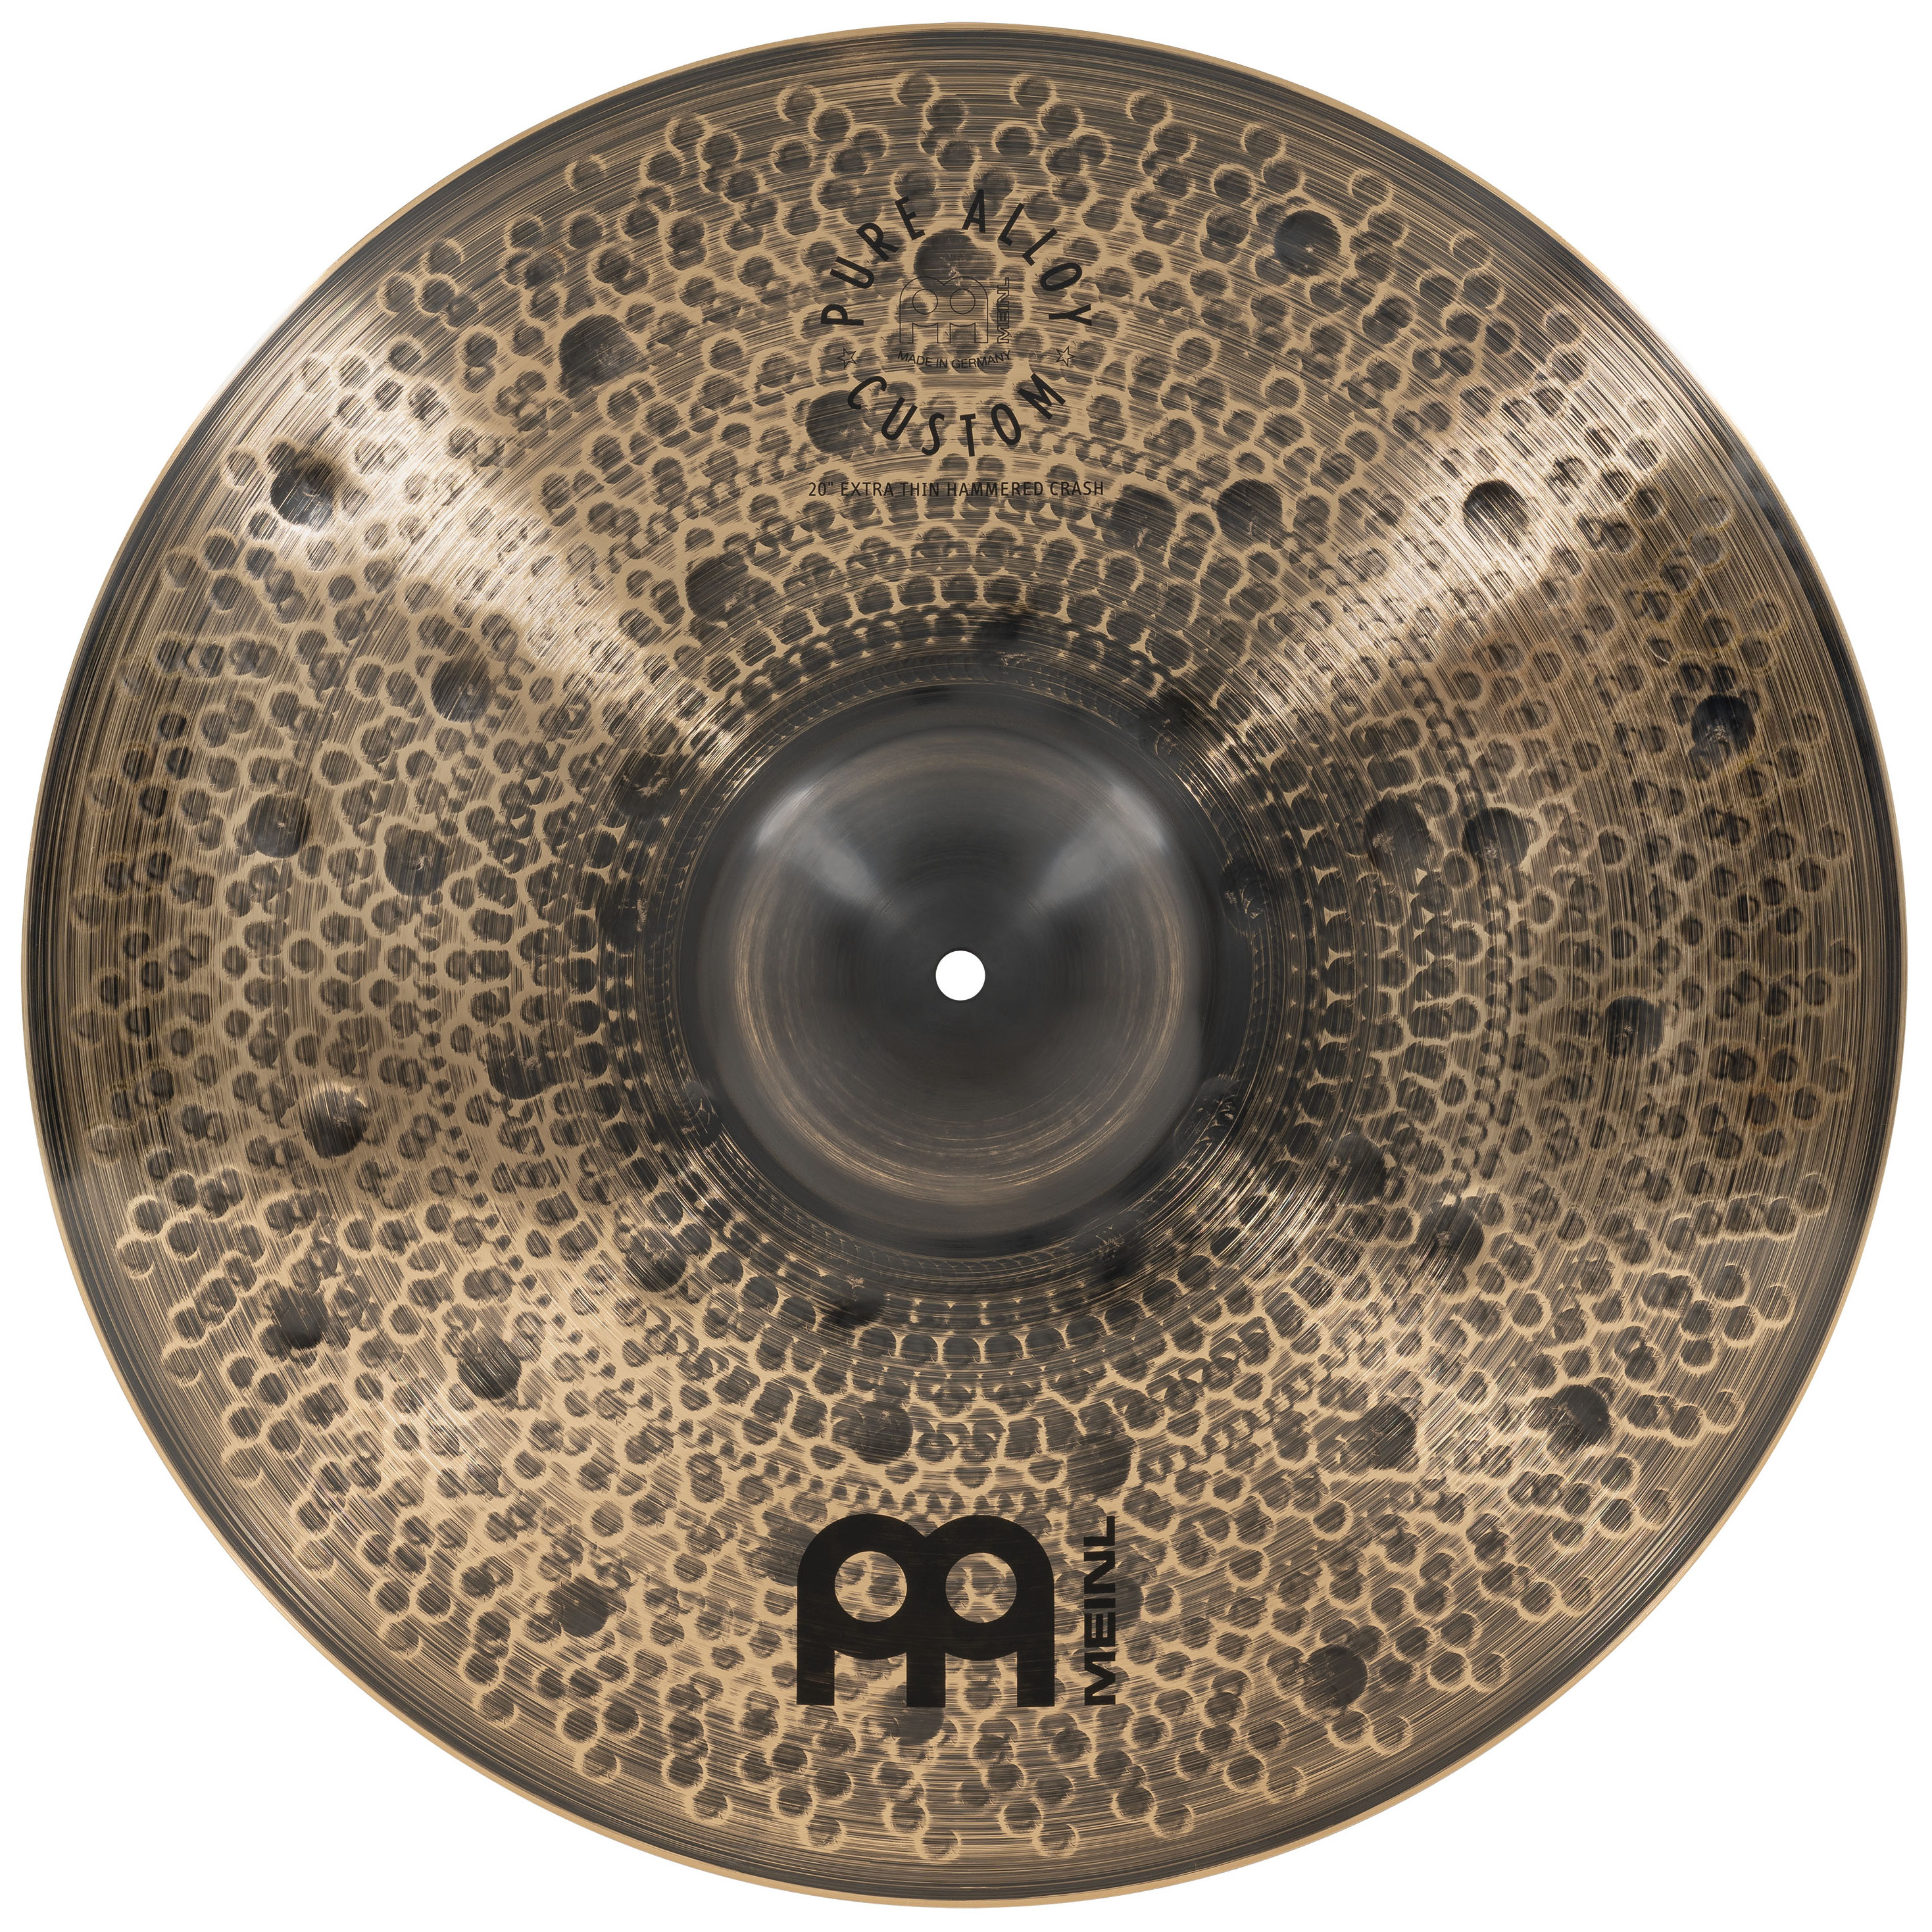 Meinl Cymbals PAC20ETHC - 20" Pure Alloy Custom Extra Thin Hammered Crash